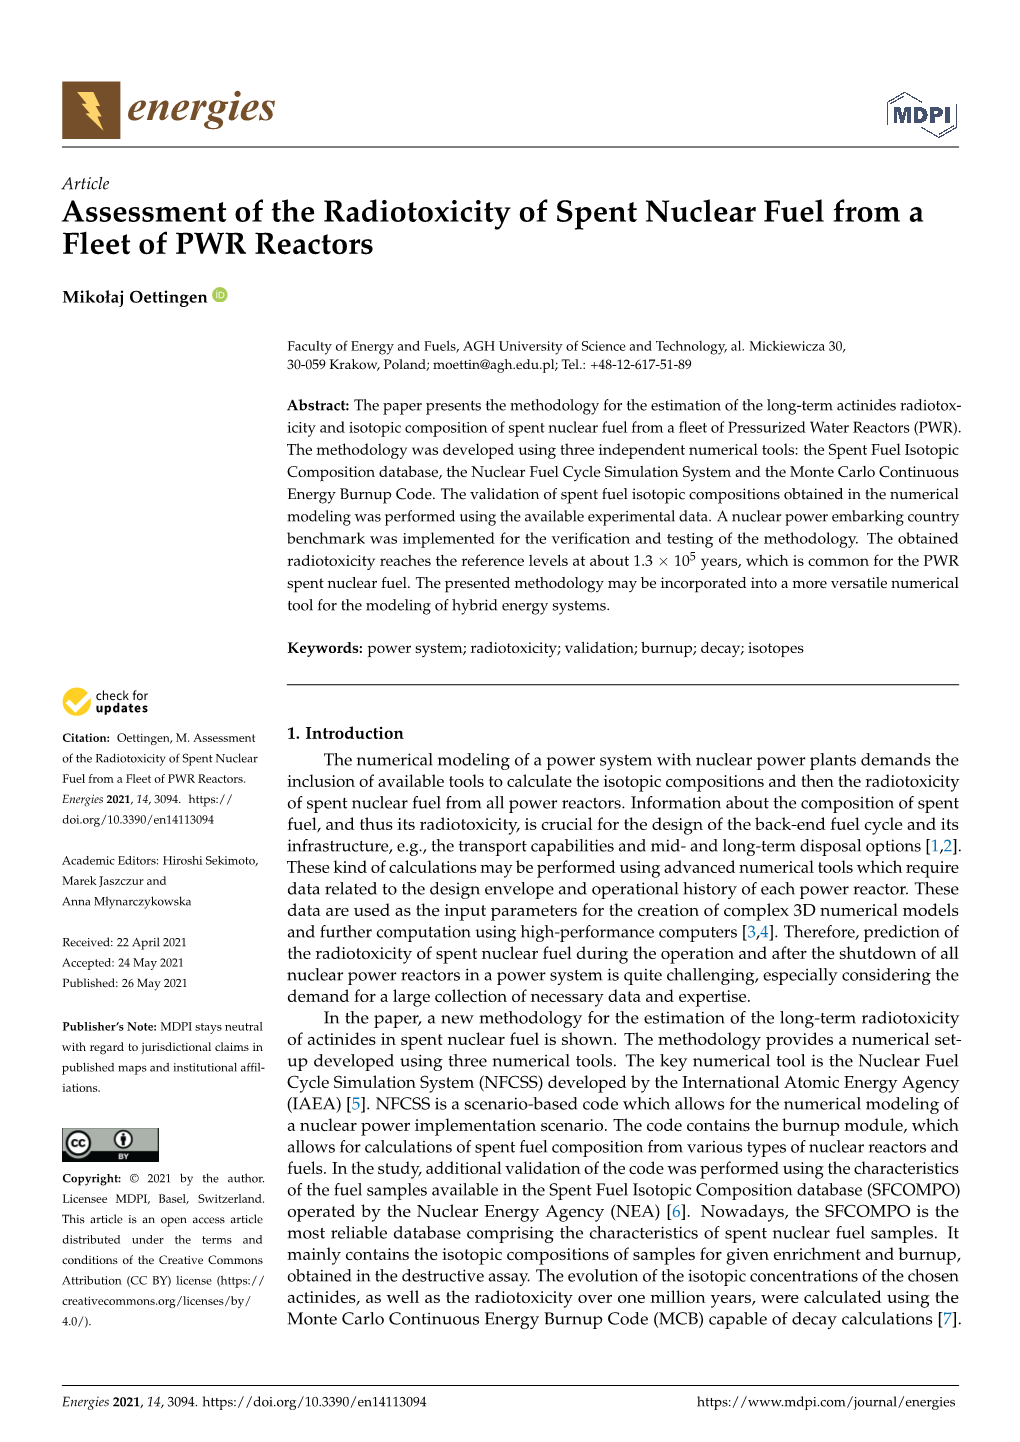 Assessment of the Radiotoxicity of Spent Nuclear Fuel from a Fleet of PWR Reactors